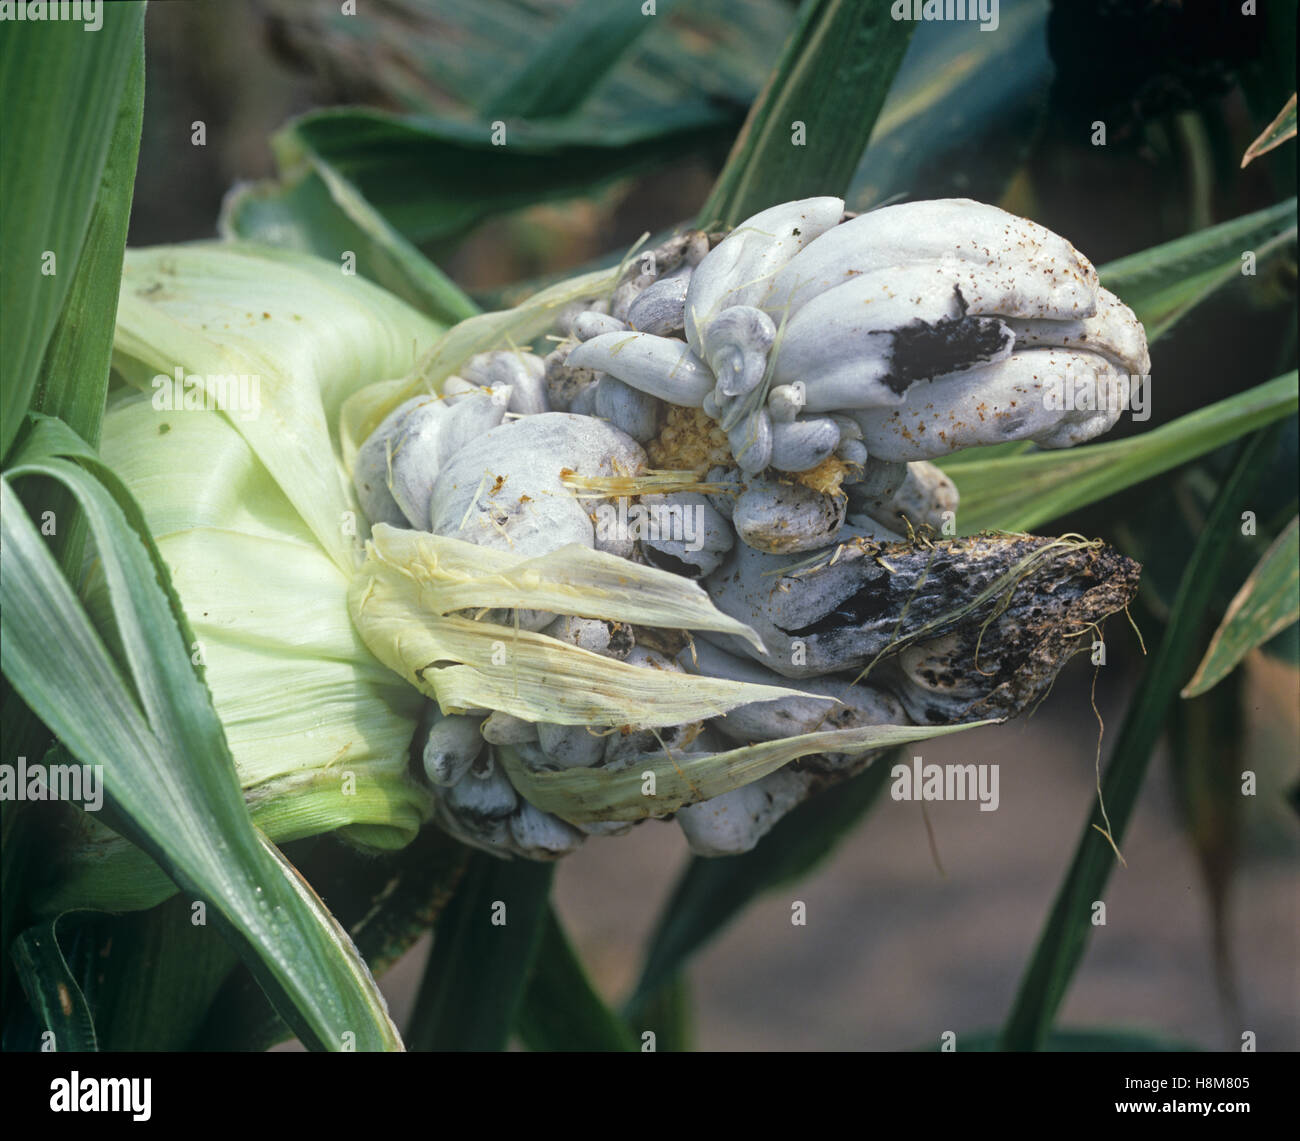 Corn or maize smut, Ustilago maydis, infection and distortion on a corn or maize  cob, USA Stock Photo